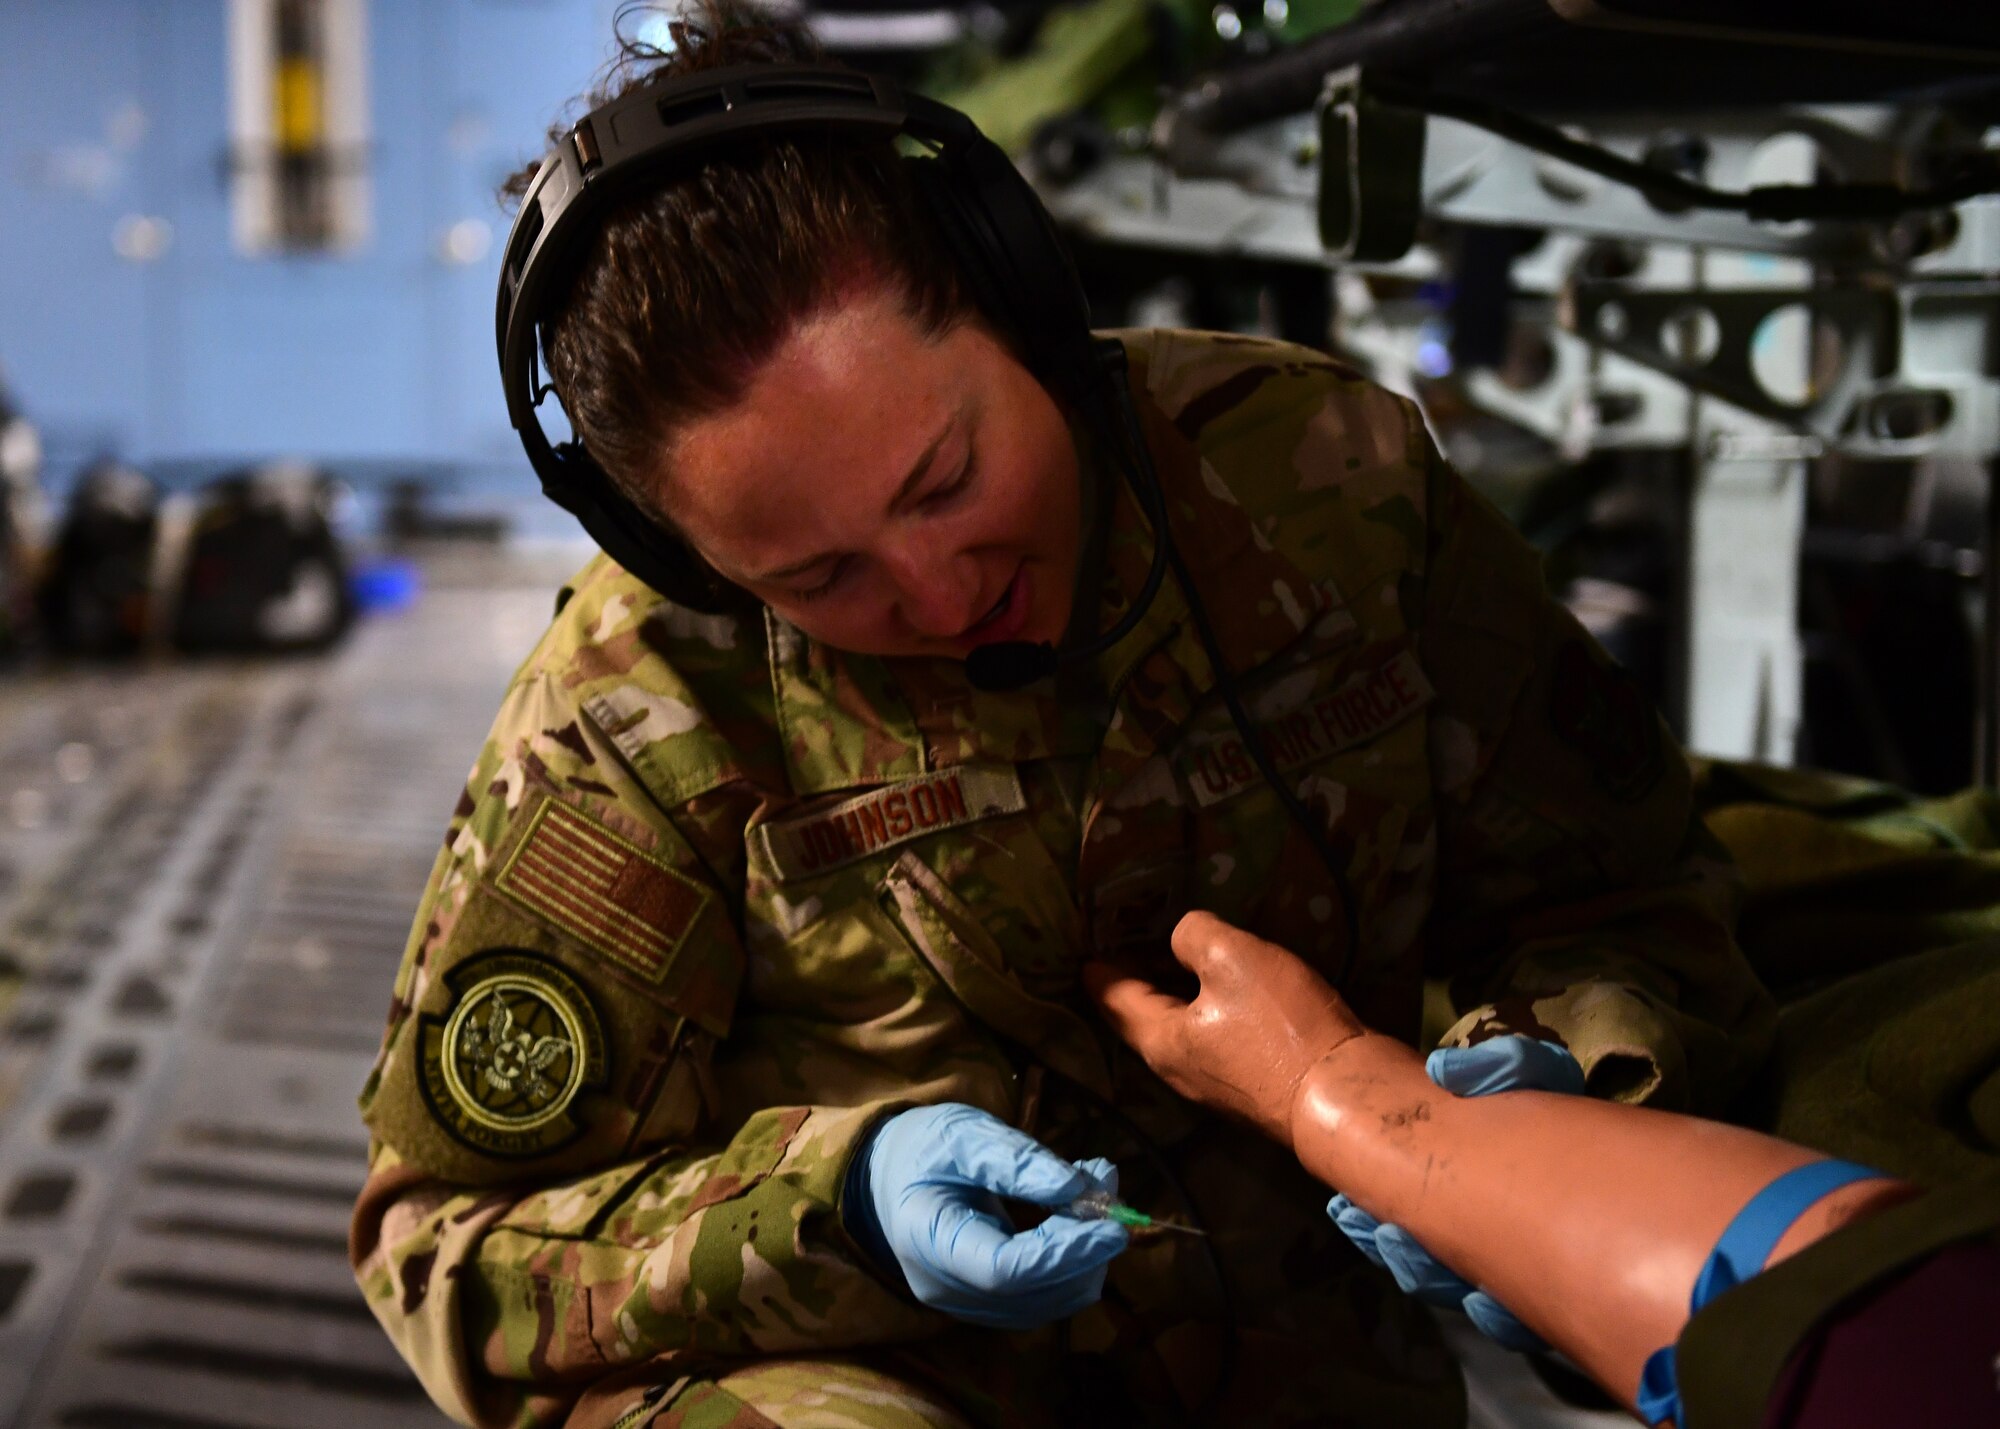 Tech Sgt. Mindy Johnson, 911th Aeromedical Evacuation Squadron medical technician, prepares to insert a needle near Honolulu, Hawaii April 26, 2019. The training in the air was meant to supplement the ground training that they did in Honolulu, Hawaii.(U.S. Air Force Photo by Senior Airman Grace Thomson)